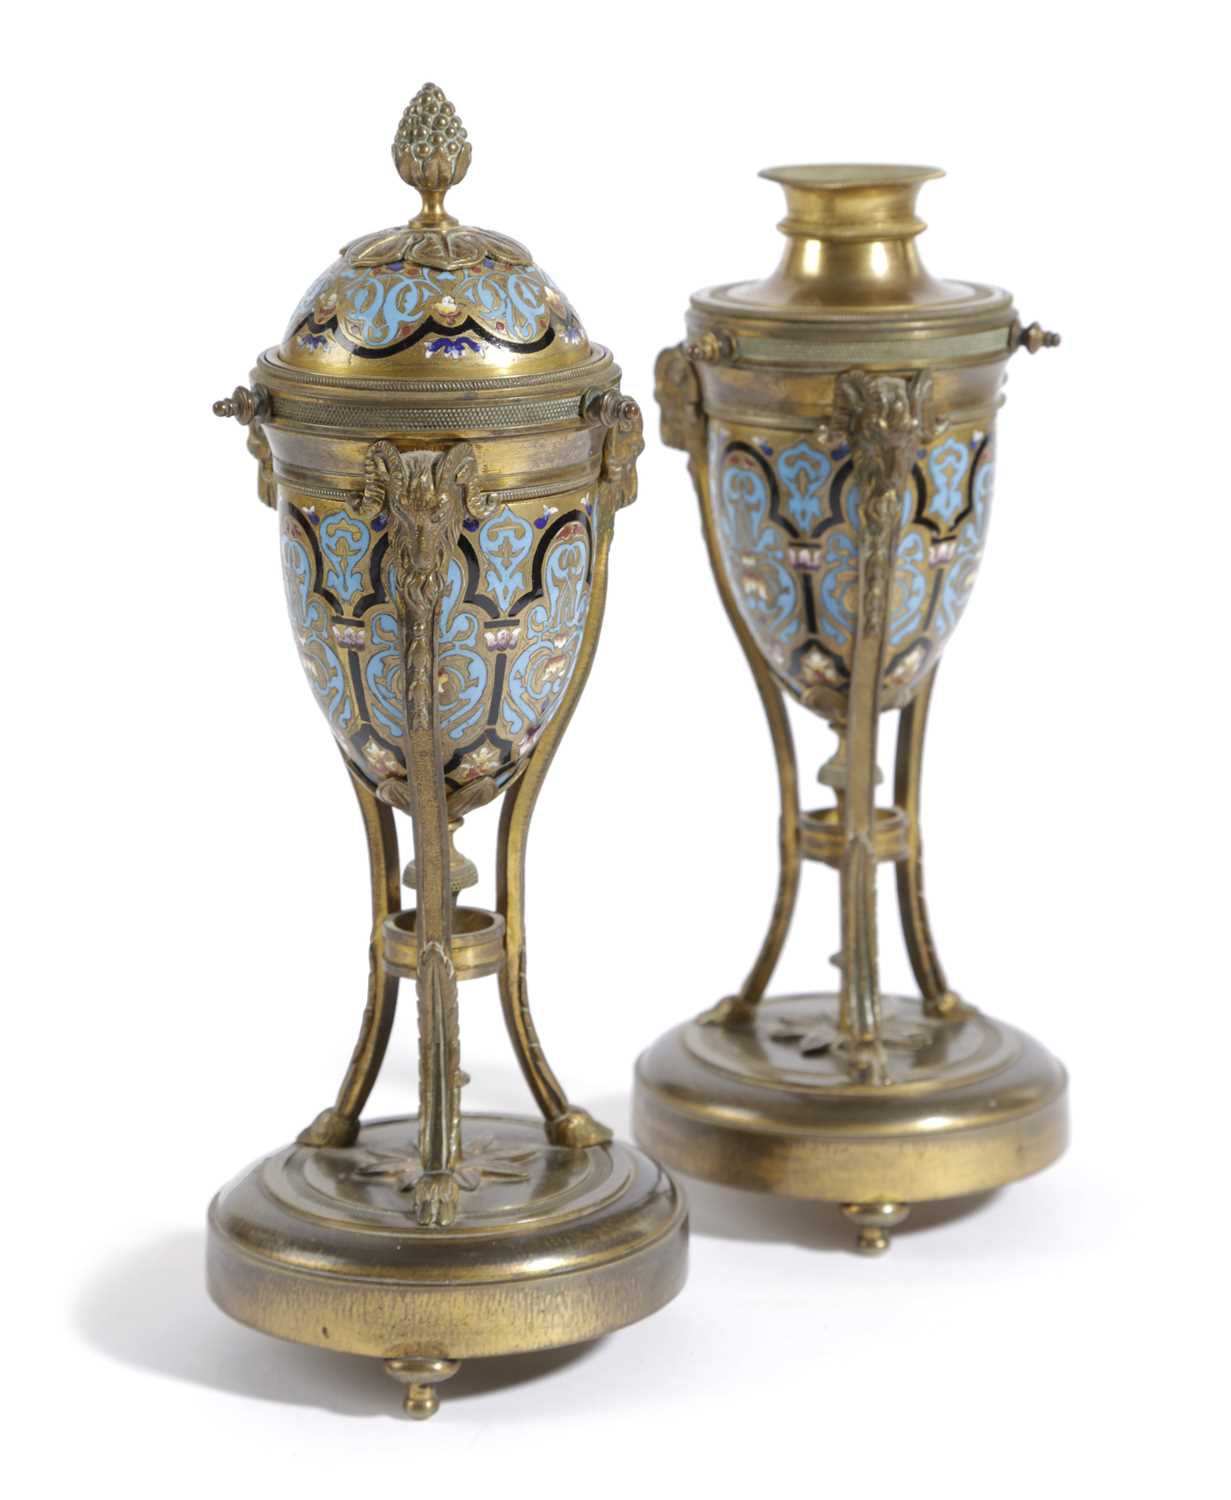 A PAIR OF FRENCH GILT BRONZE AND CHAMPLEVE ENAMEL CASSOLETTES IN LOUIS XVI STYLE, LATE 19TH